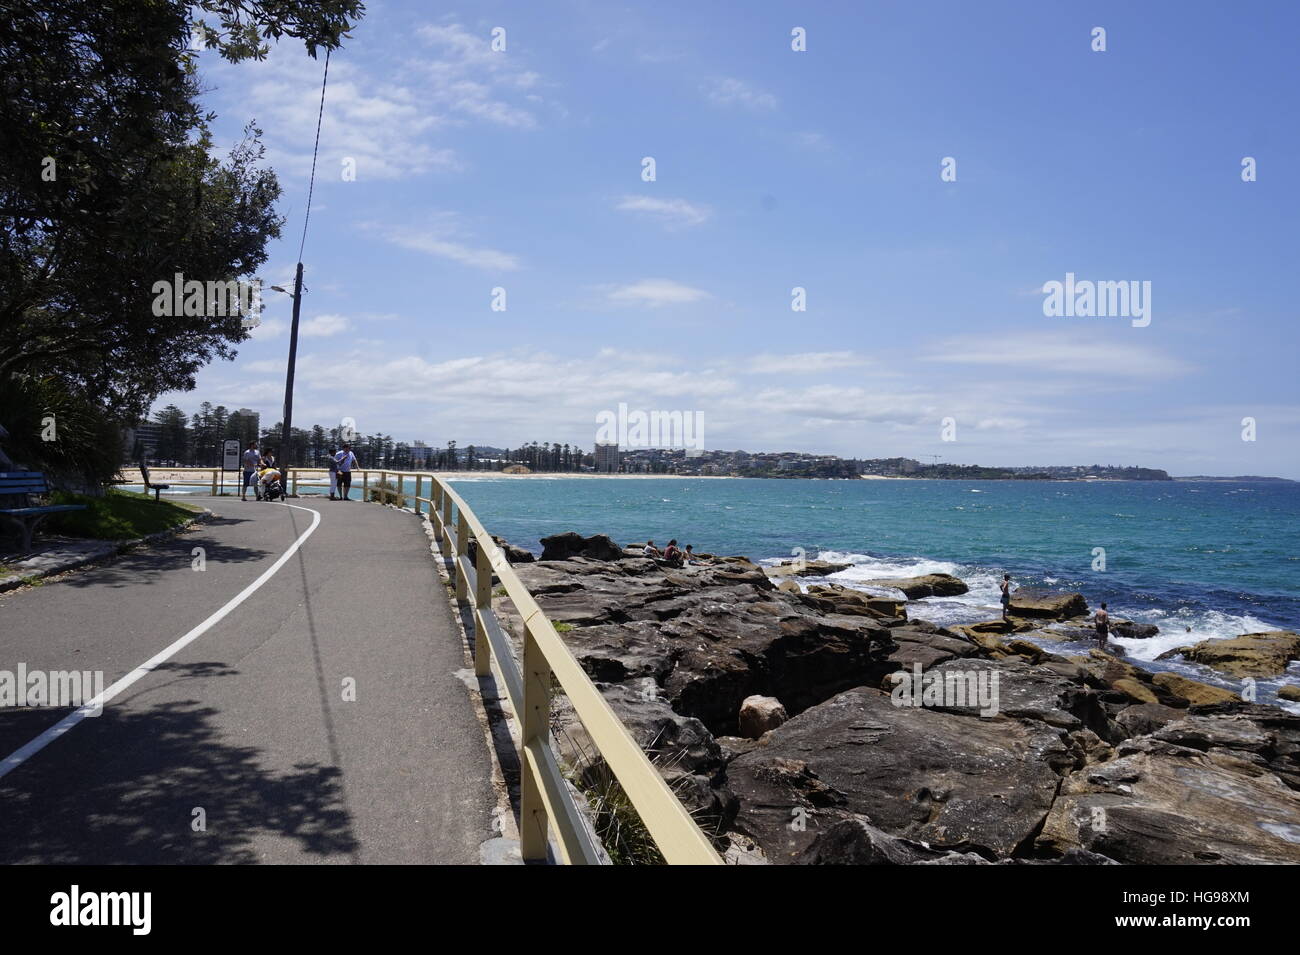 A view of Manly Beach in Sydney, Australia Stock Photo